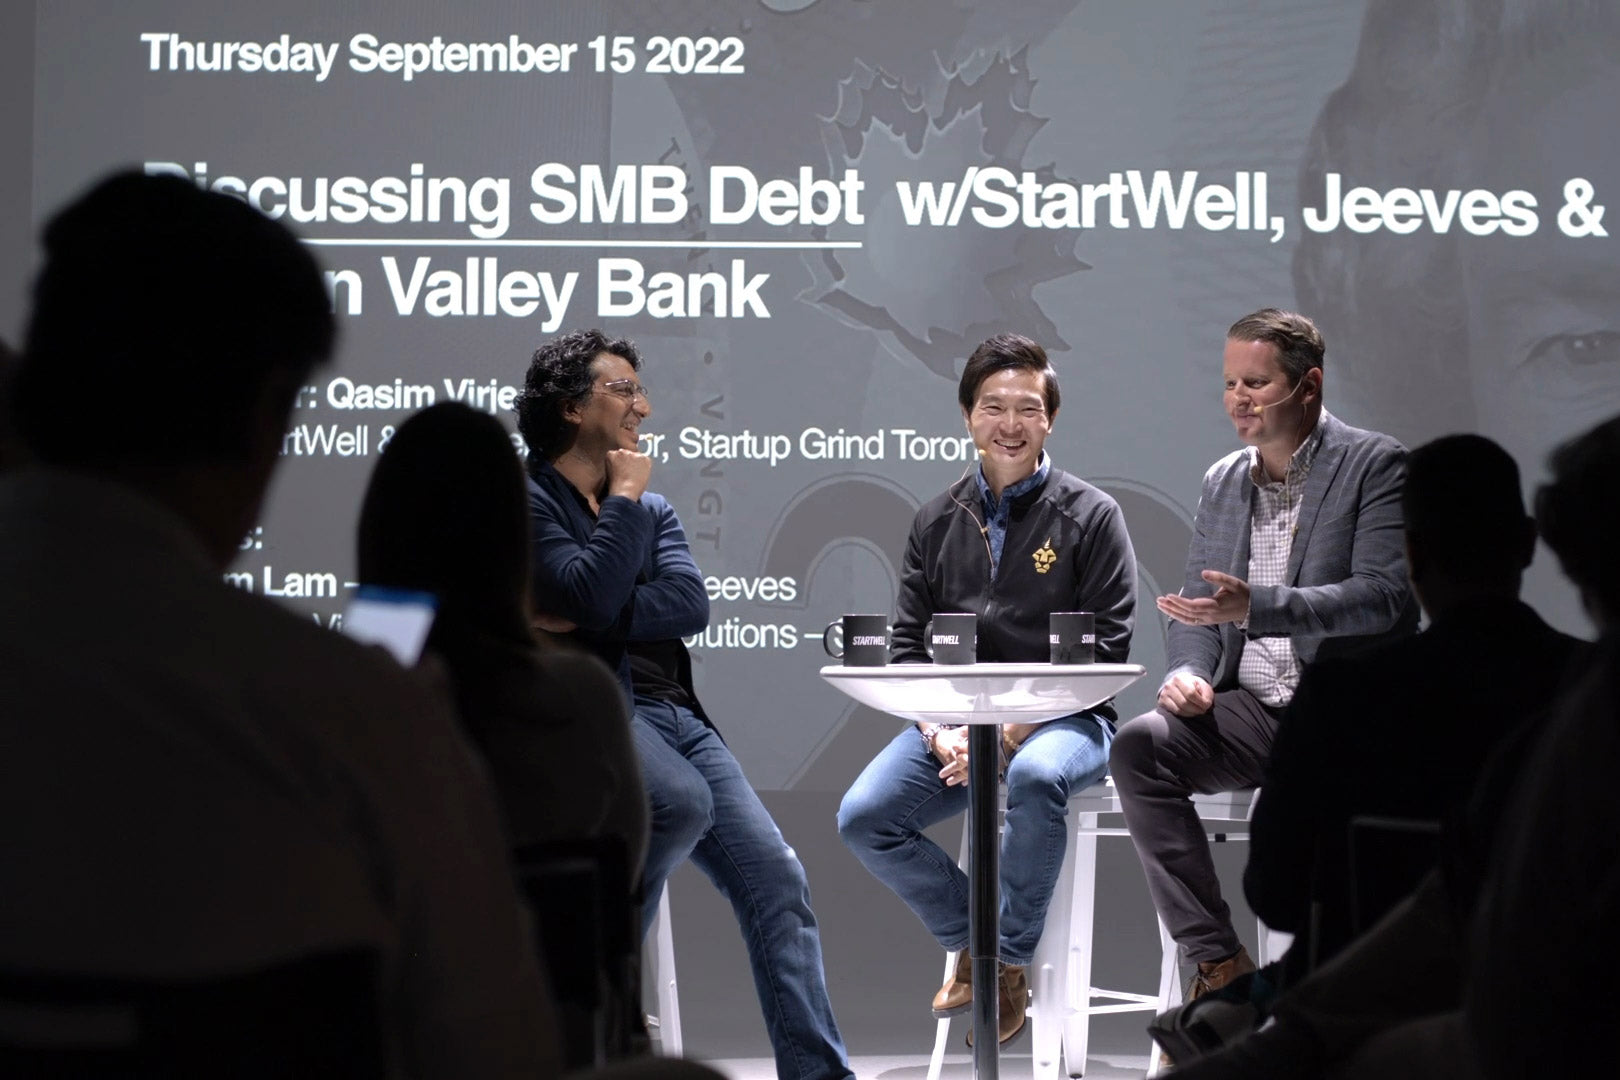 William Lam from Jeeves, Filip Stoj from Silicon Valley Bank and Qasim Virjee from StartWell on stage for Startup Grind Toronto on 09/15/22